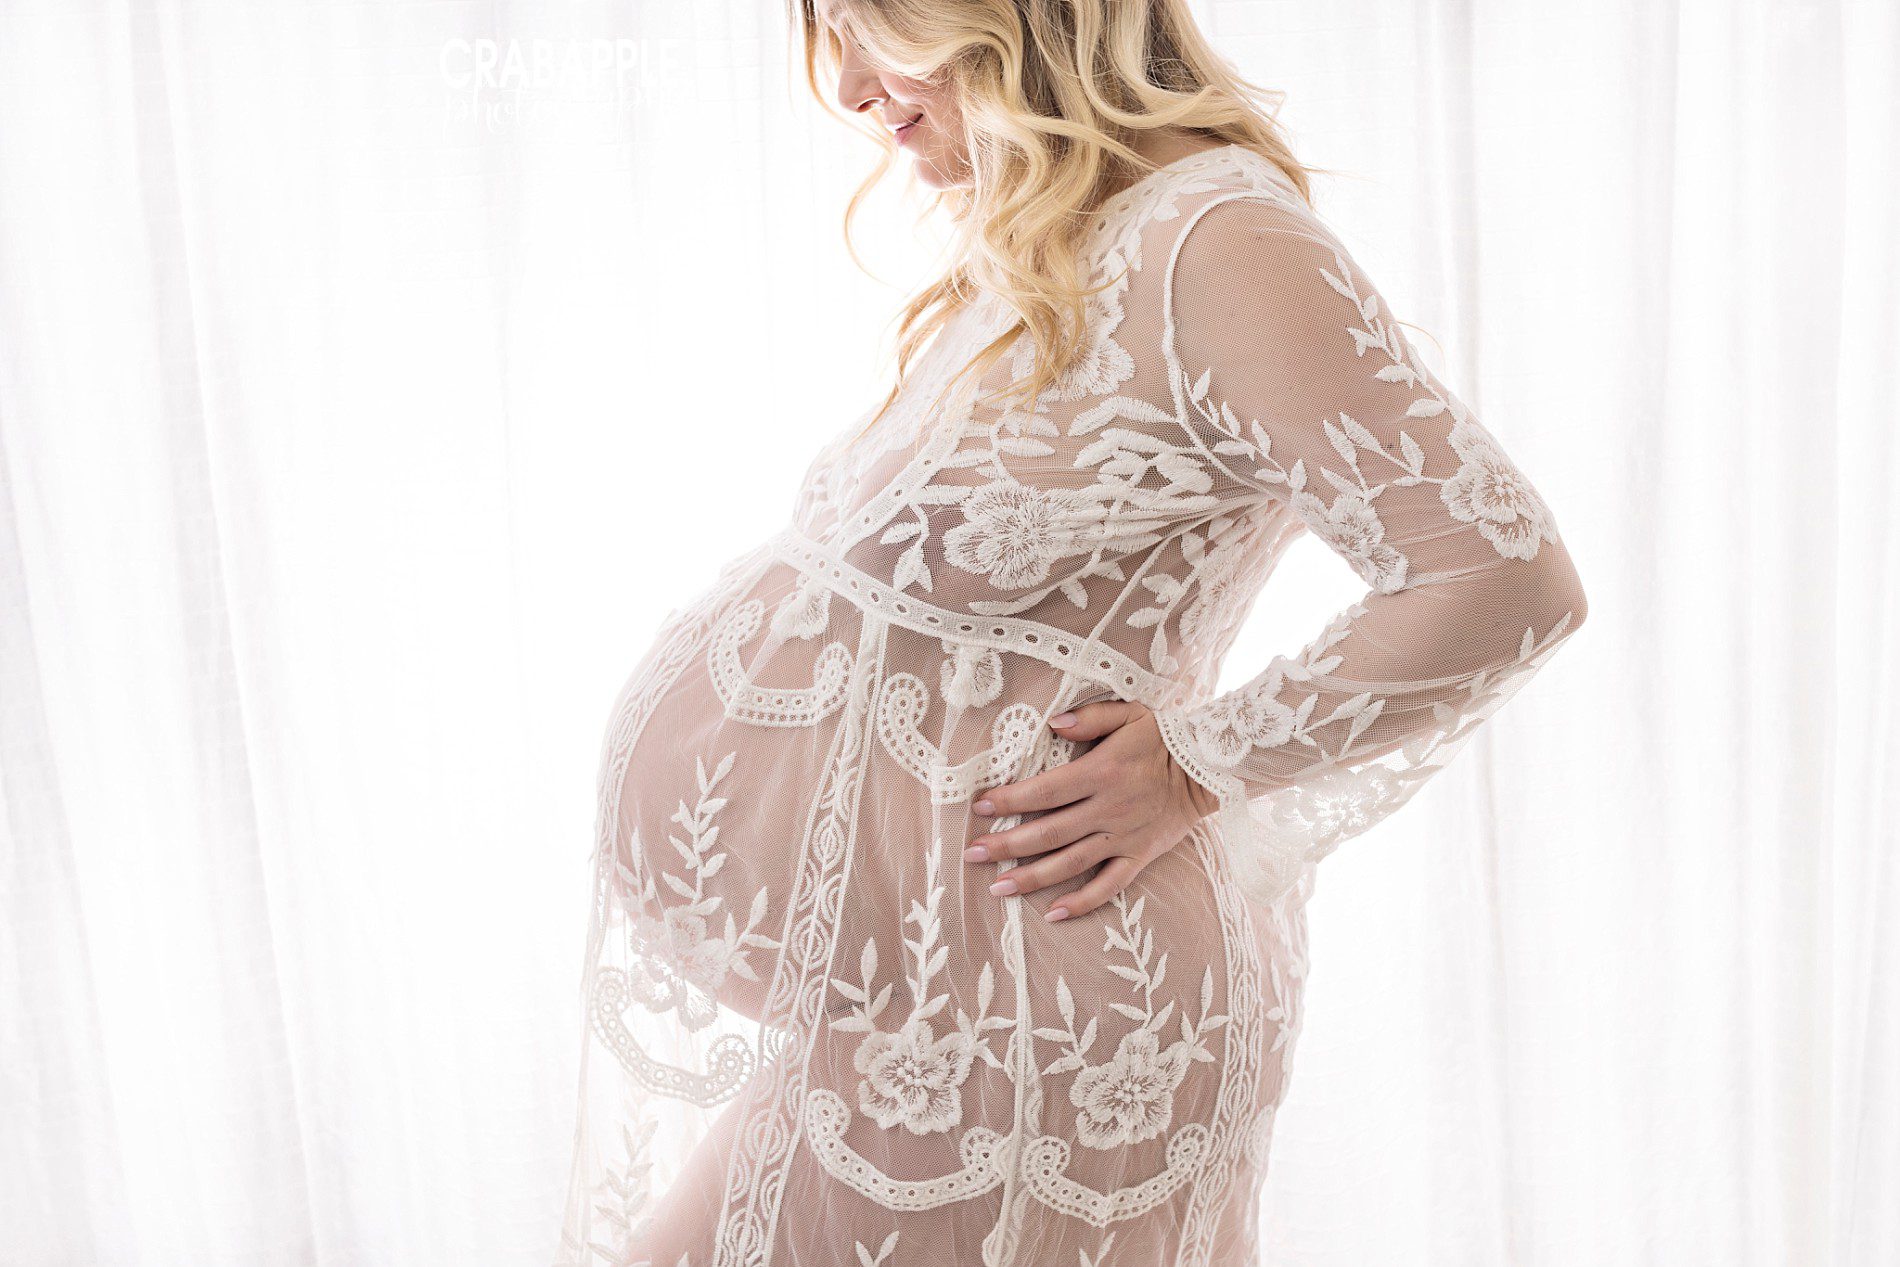 sheer lace gown for maternity portraits